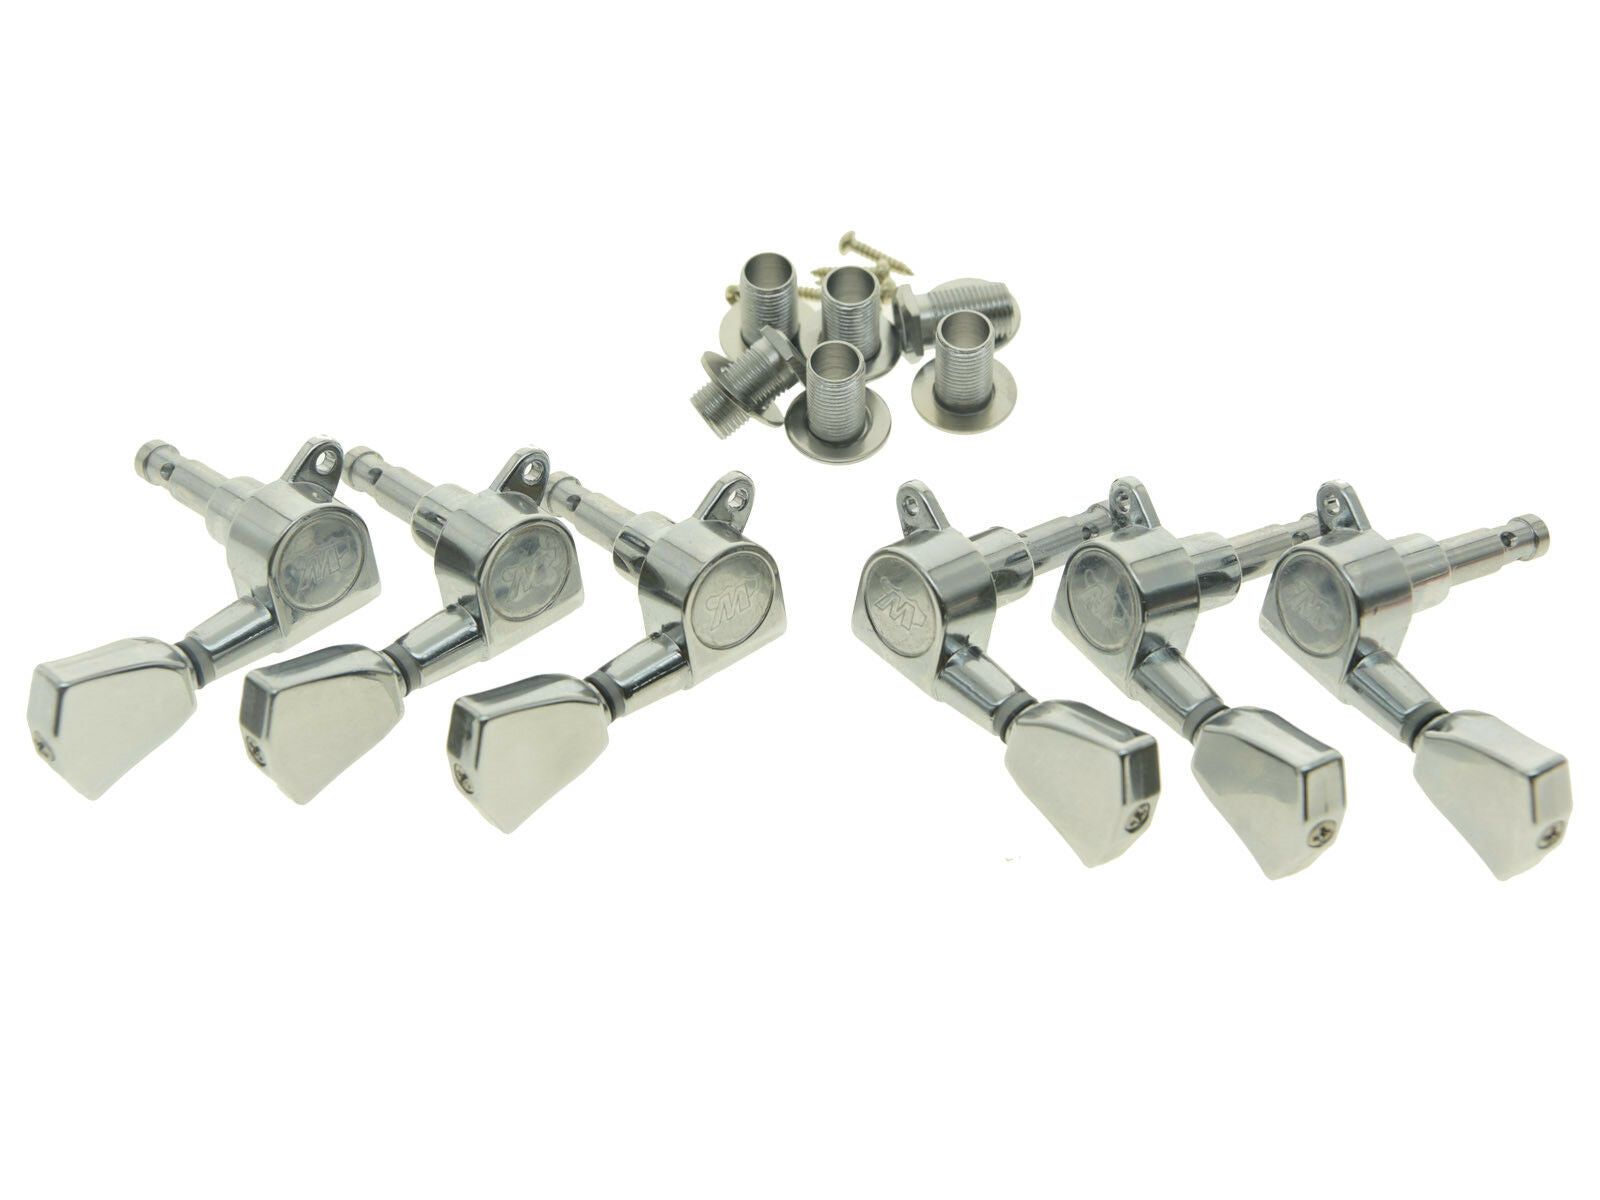 Wilkinson 3x3 E-Z Post Guitar Tuners for Les Paul or Acoustic Guitars Chrome